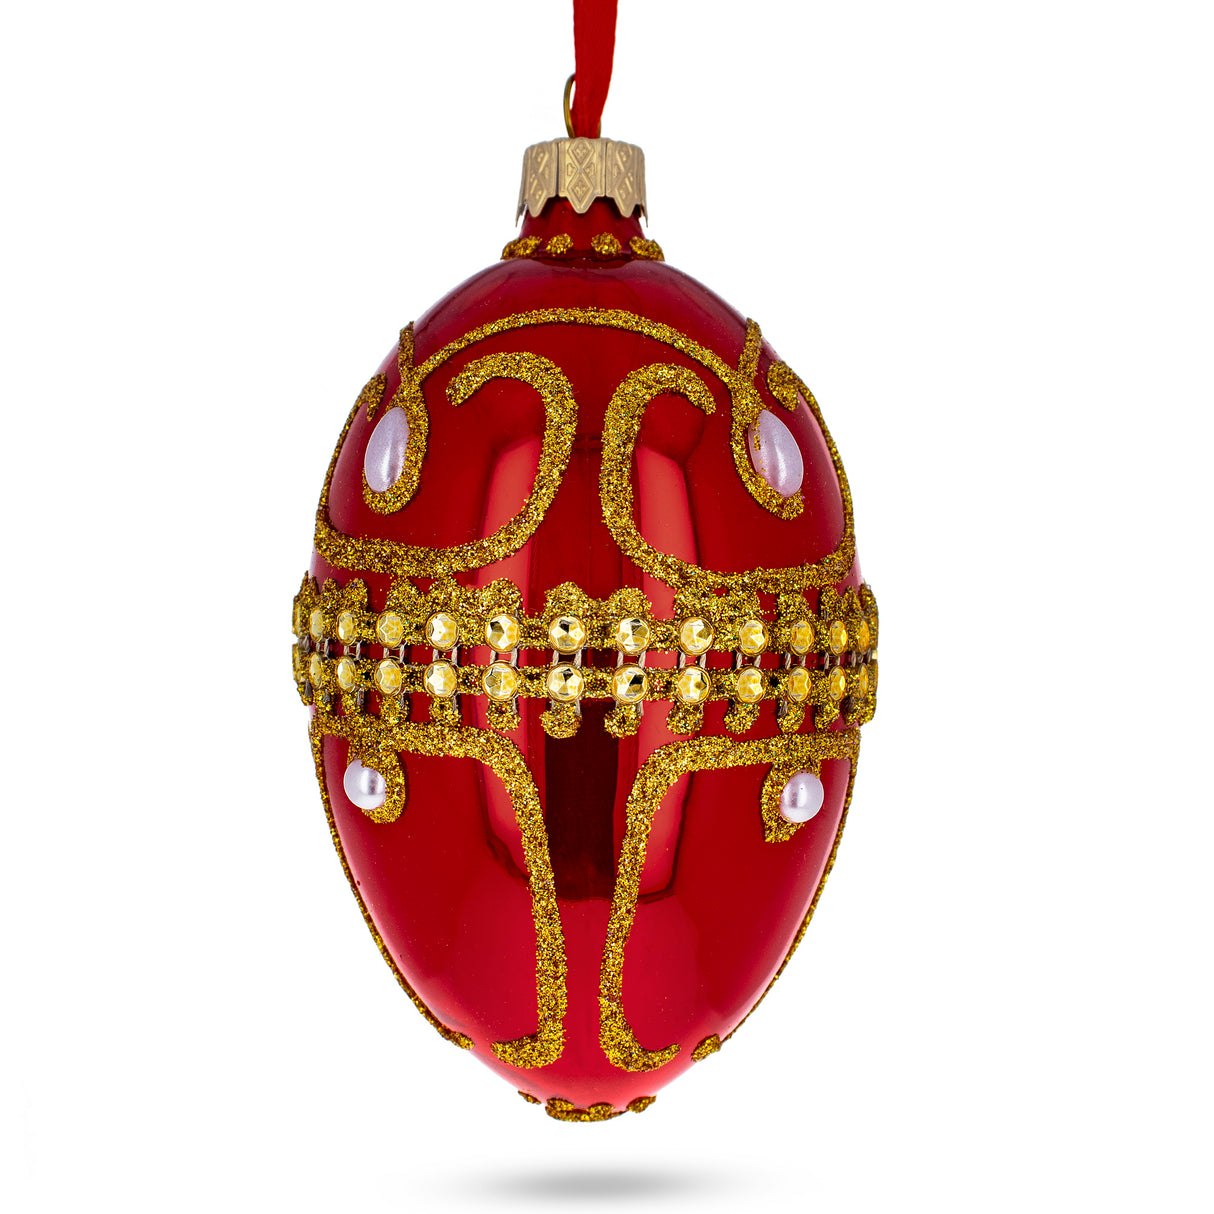 Glass Jeweled White Beads on Glossy Red Glass Egg Ornament 4 Inches in Red color Oval